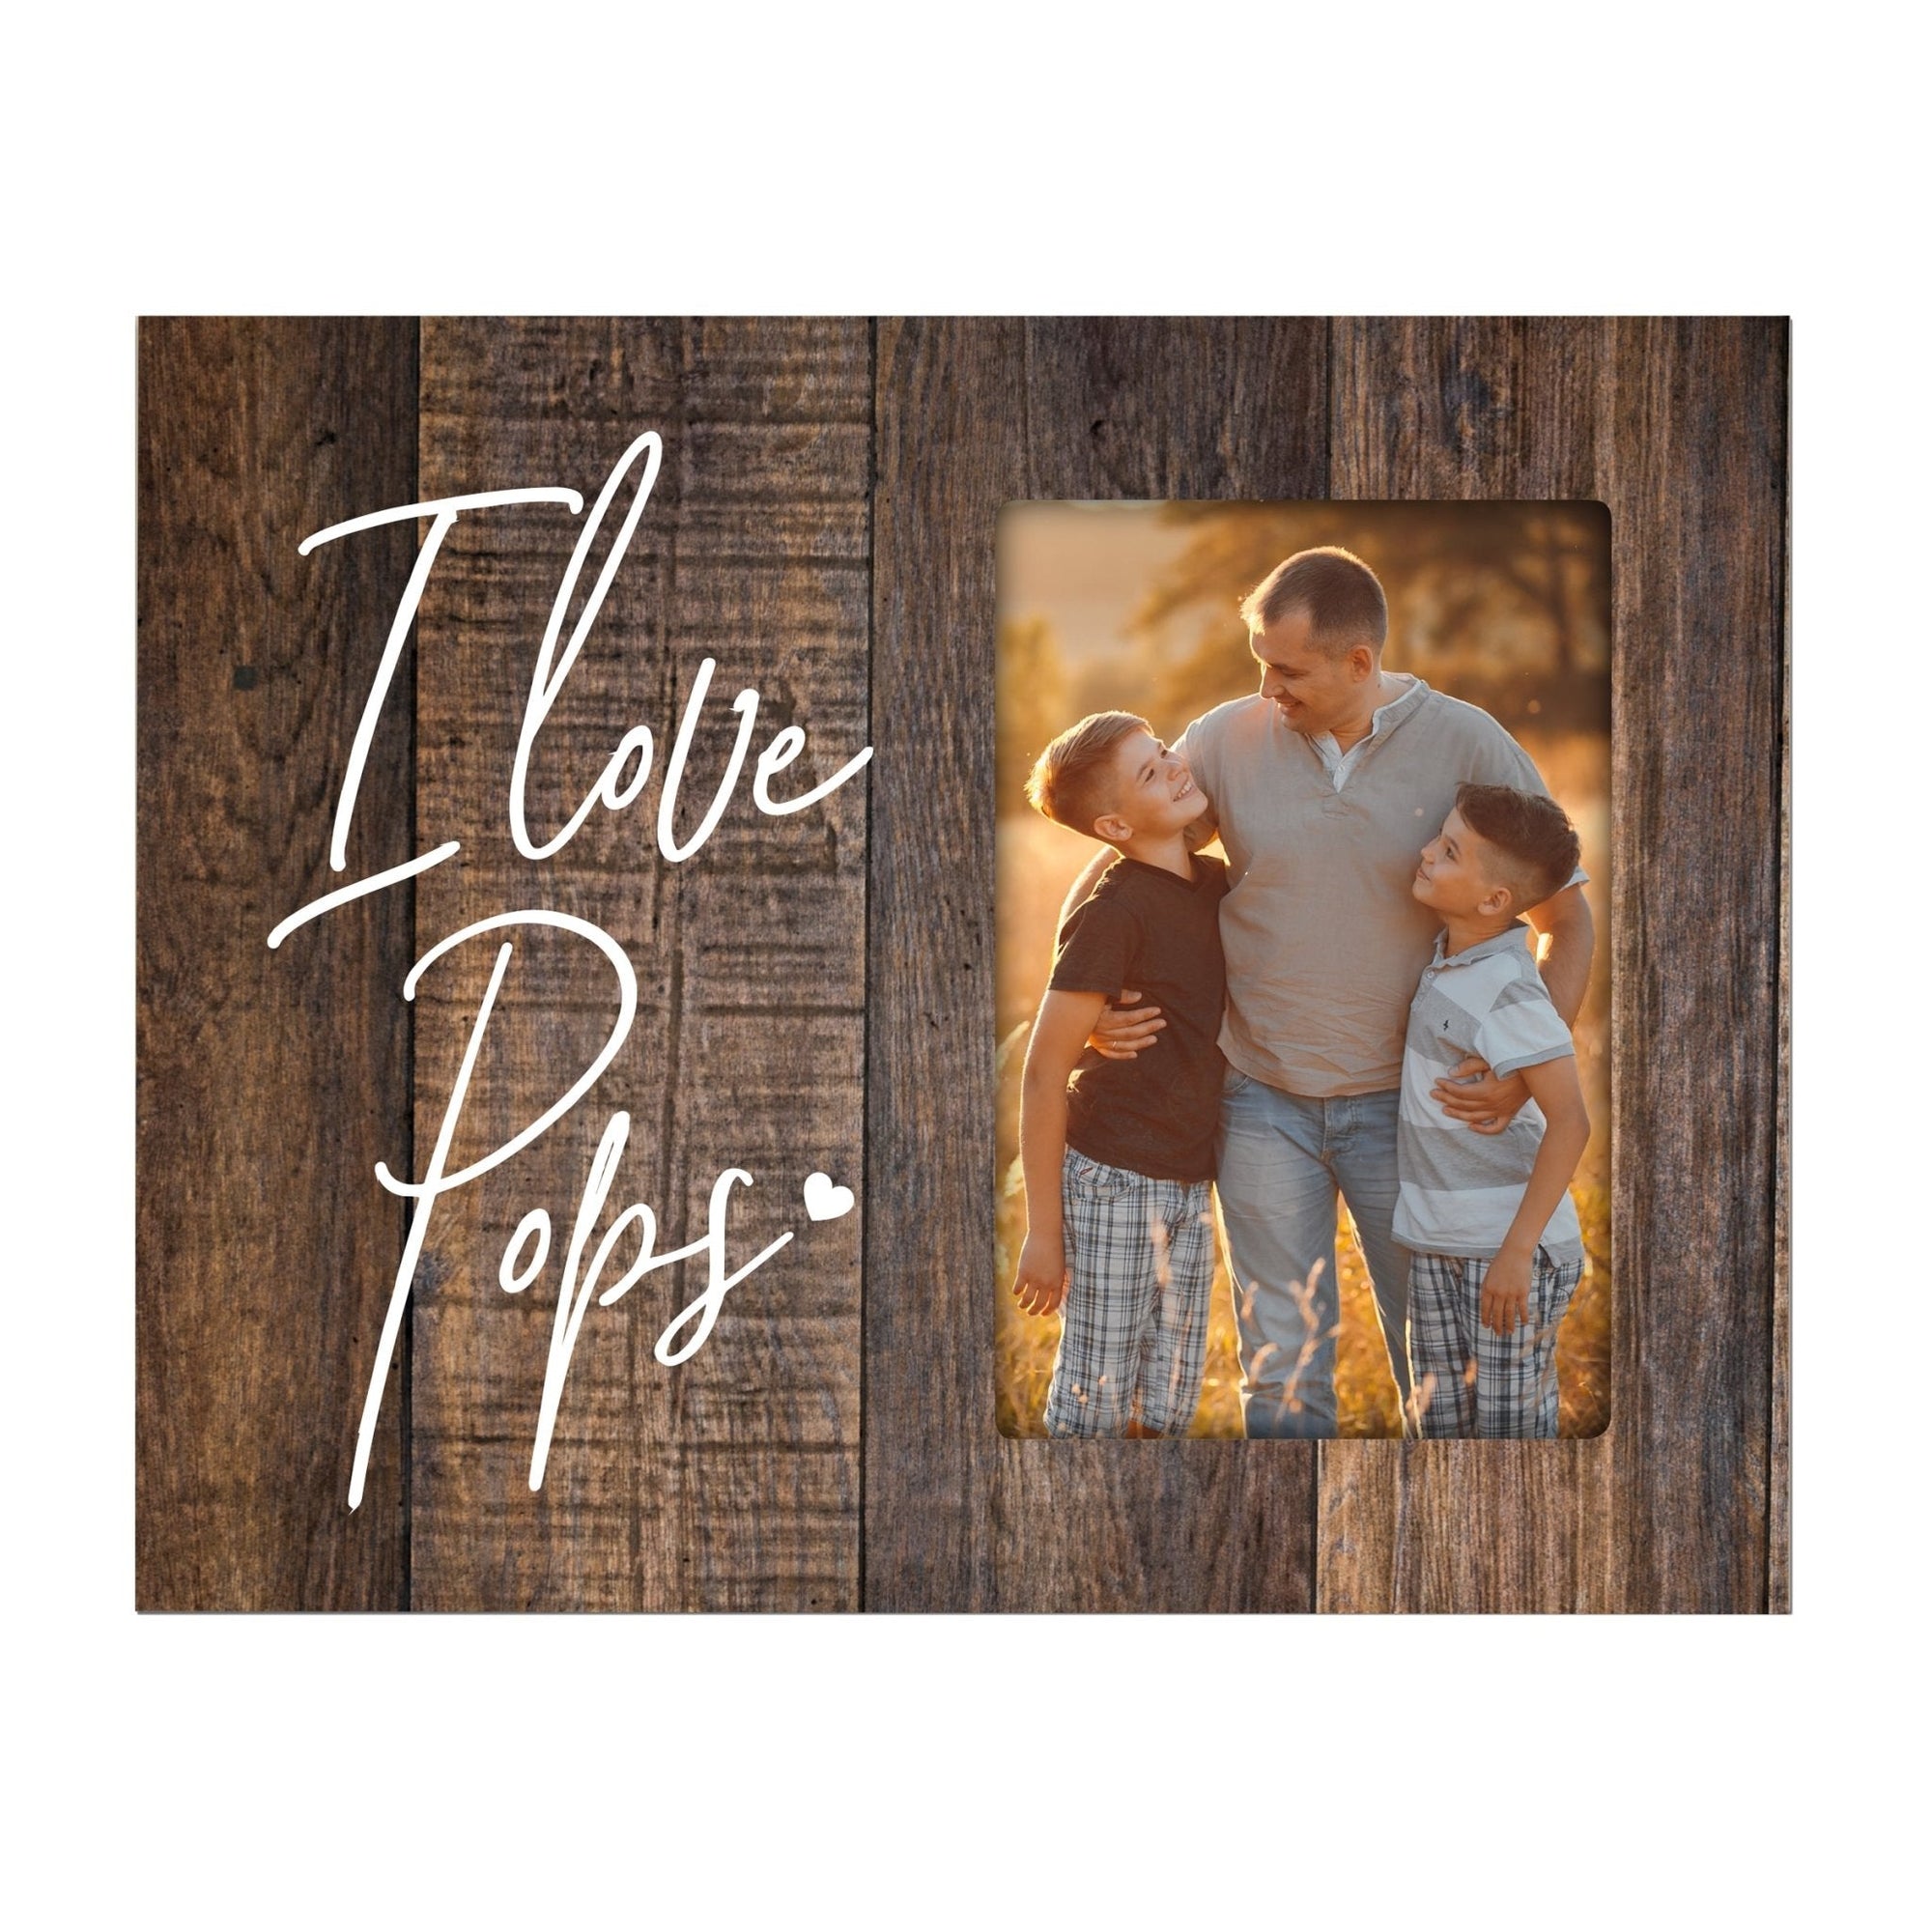 Modern Horizontal 8x10 Wooden Picture Frame Holds 4x6 Photo Home Decoration Gift Idea For Grandfathers - I Love - LifeSong Milestones